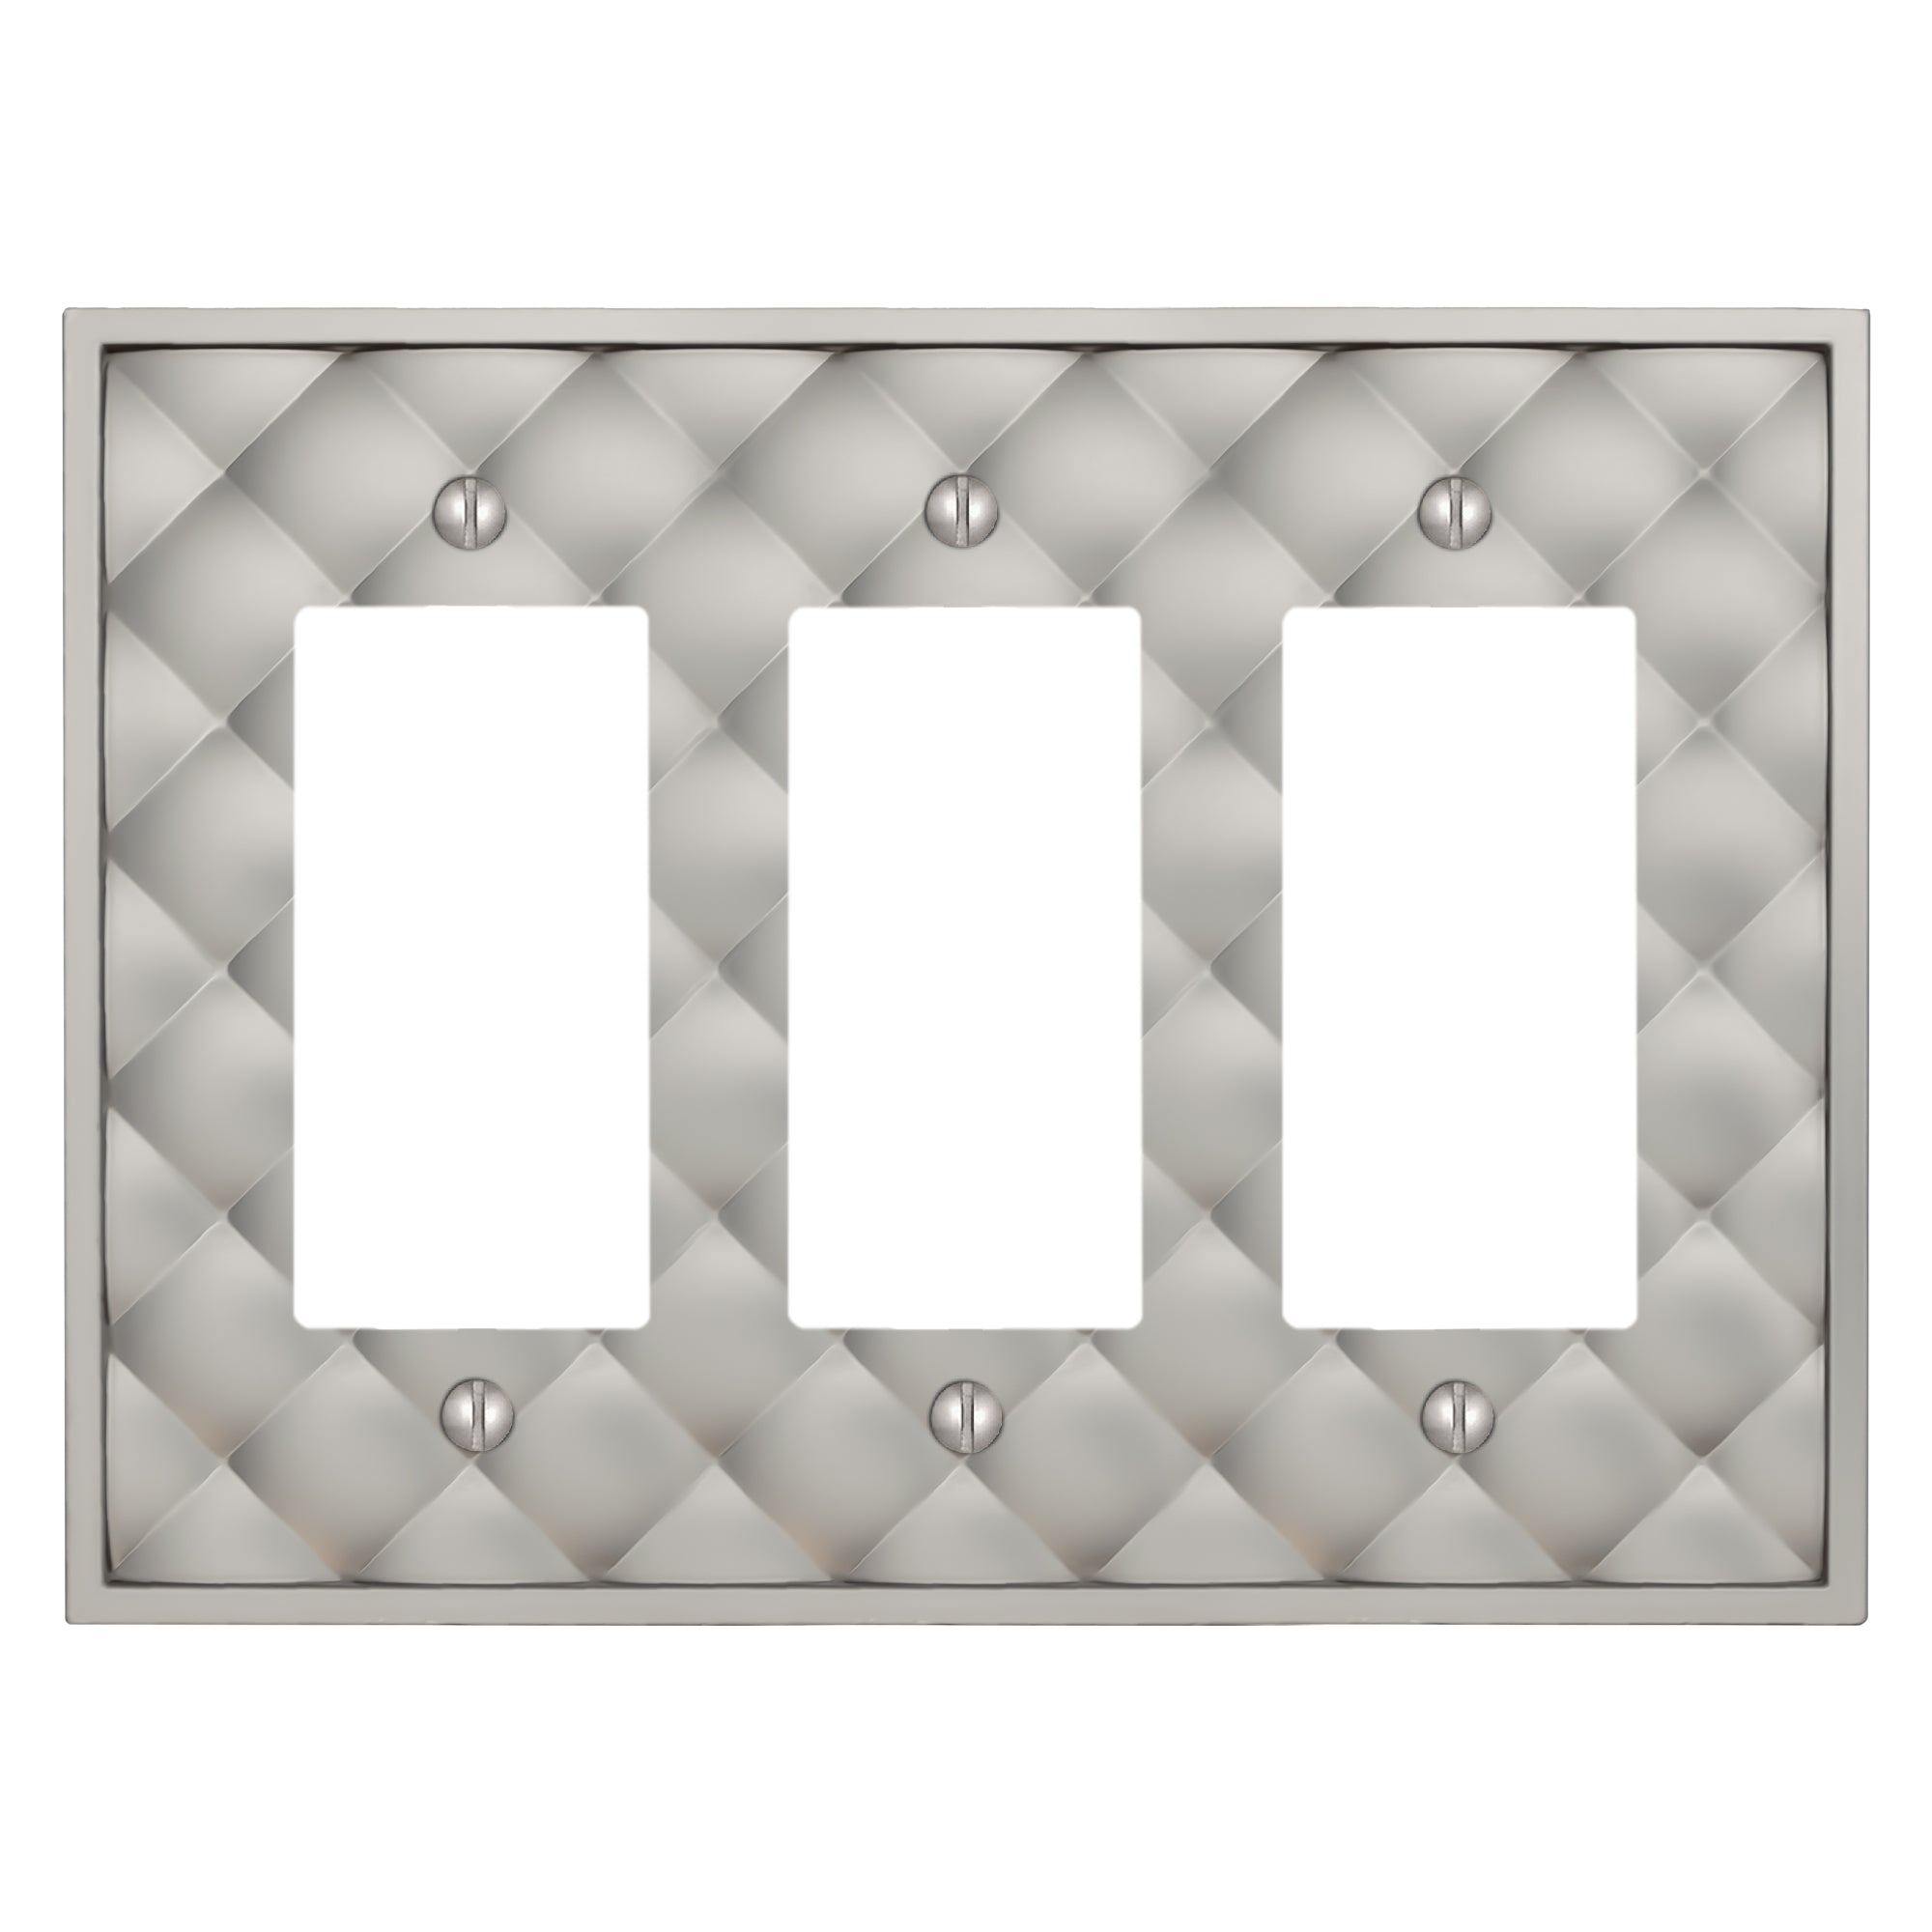 Quilted - Satin Nickel